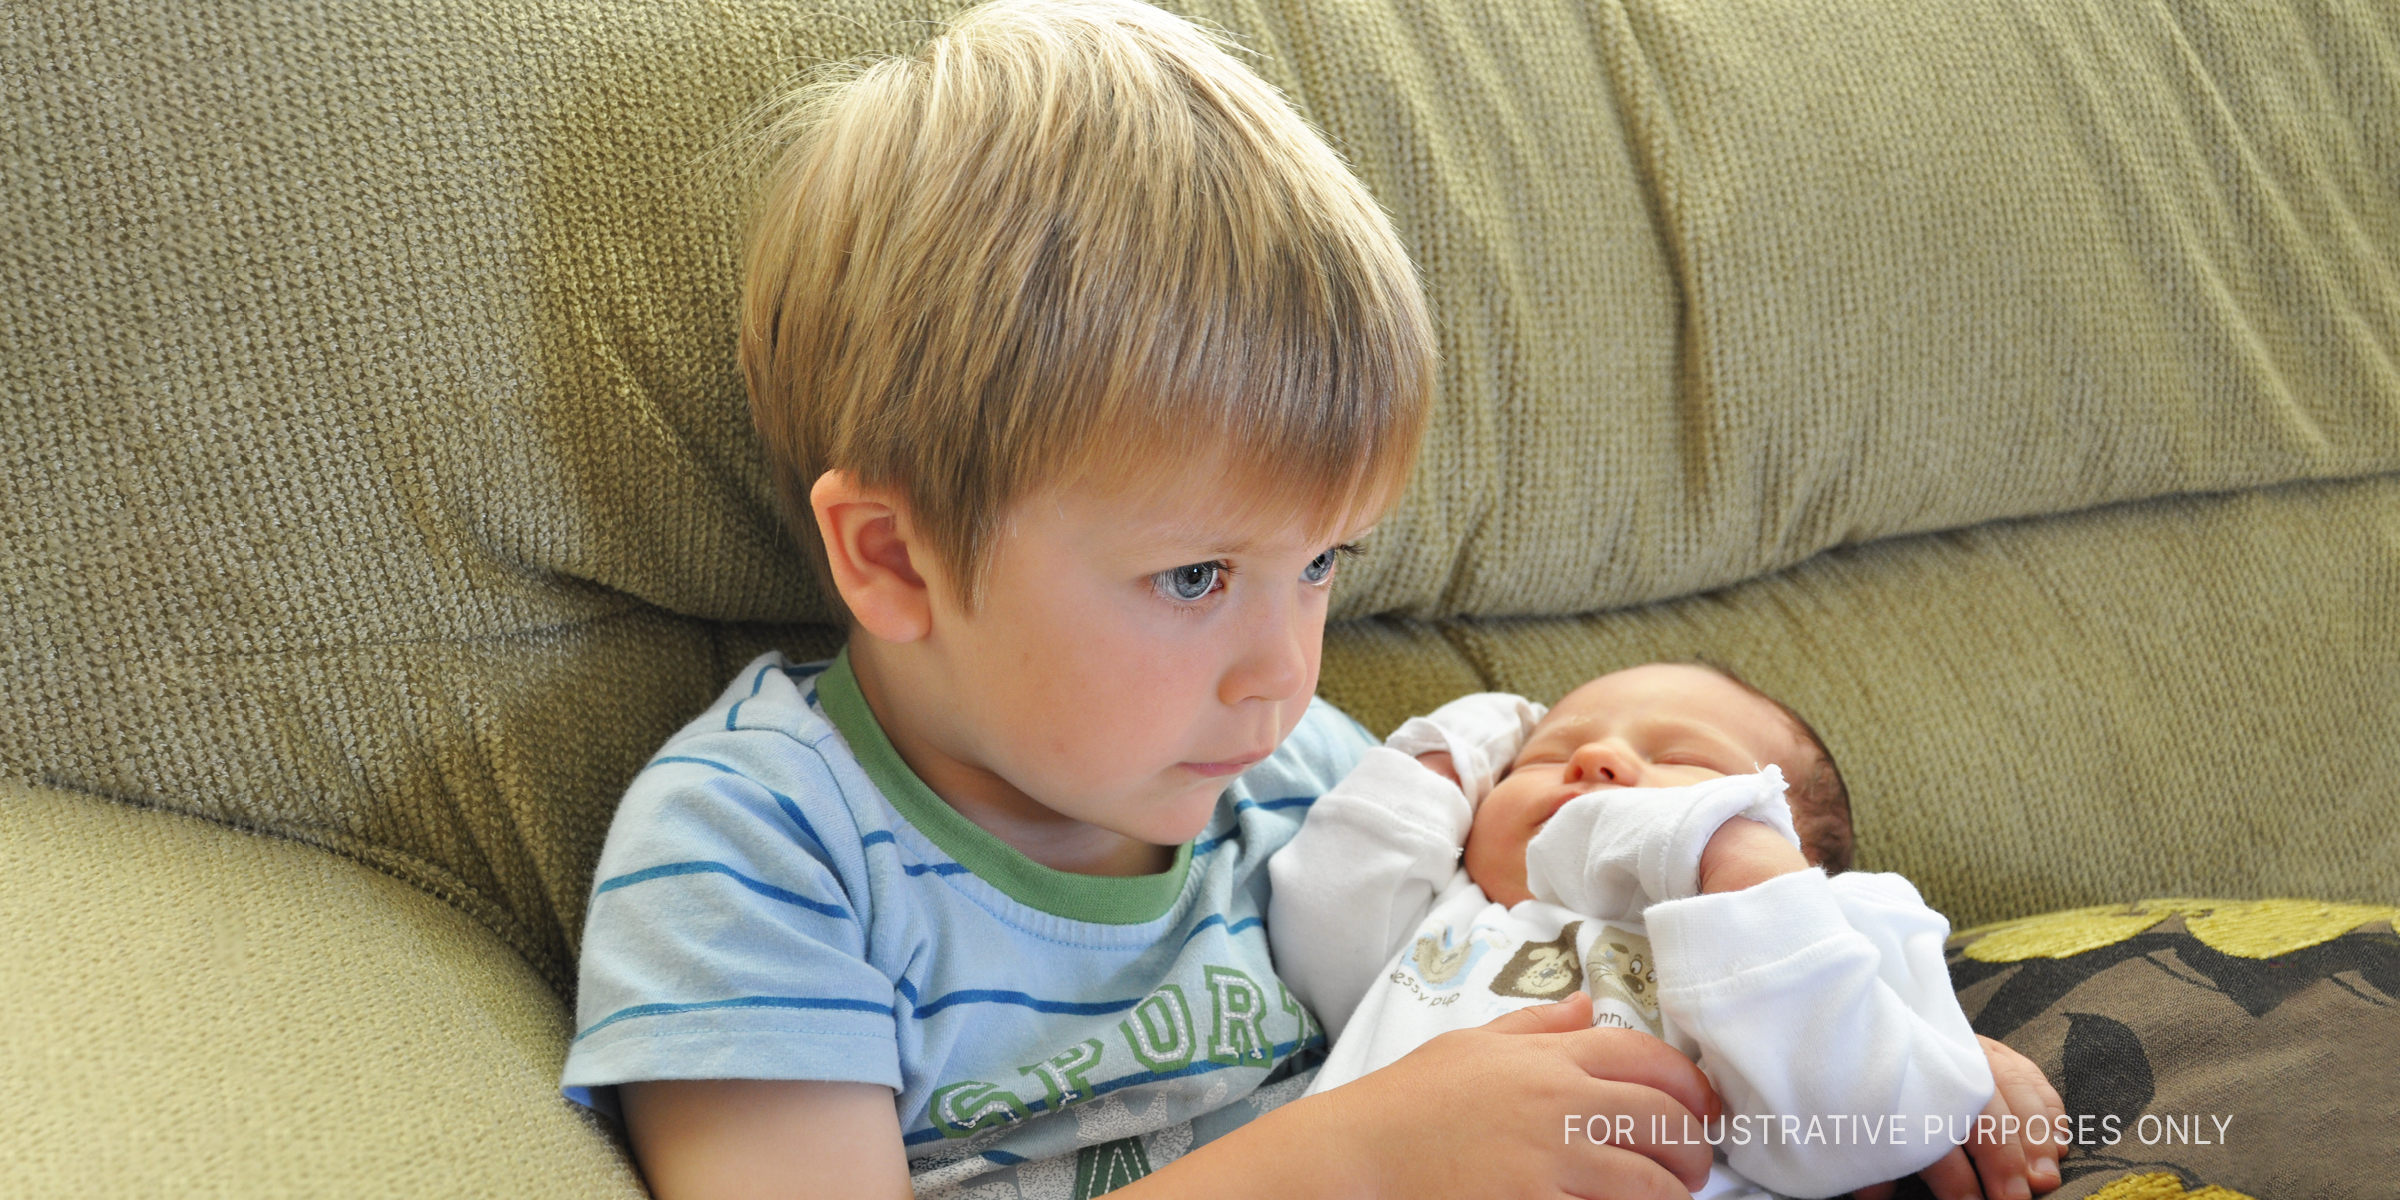 Little boy holding his baby sister | Source: Flickr/meemal (CC BY 2.0)